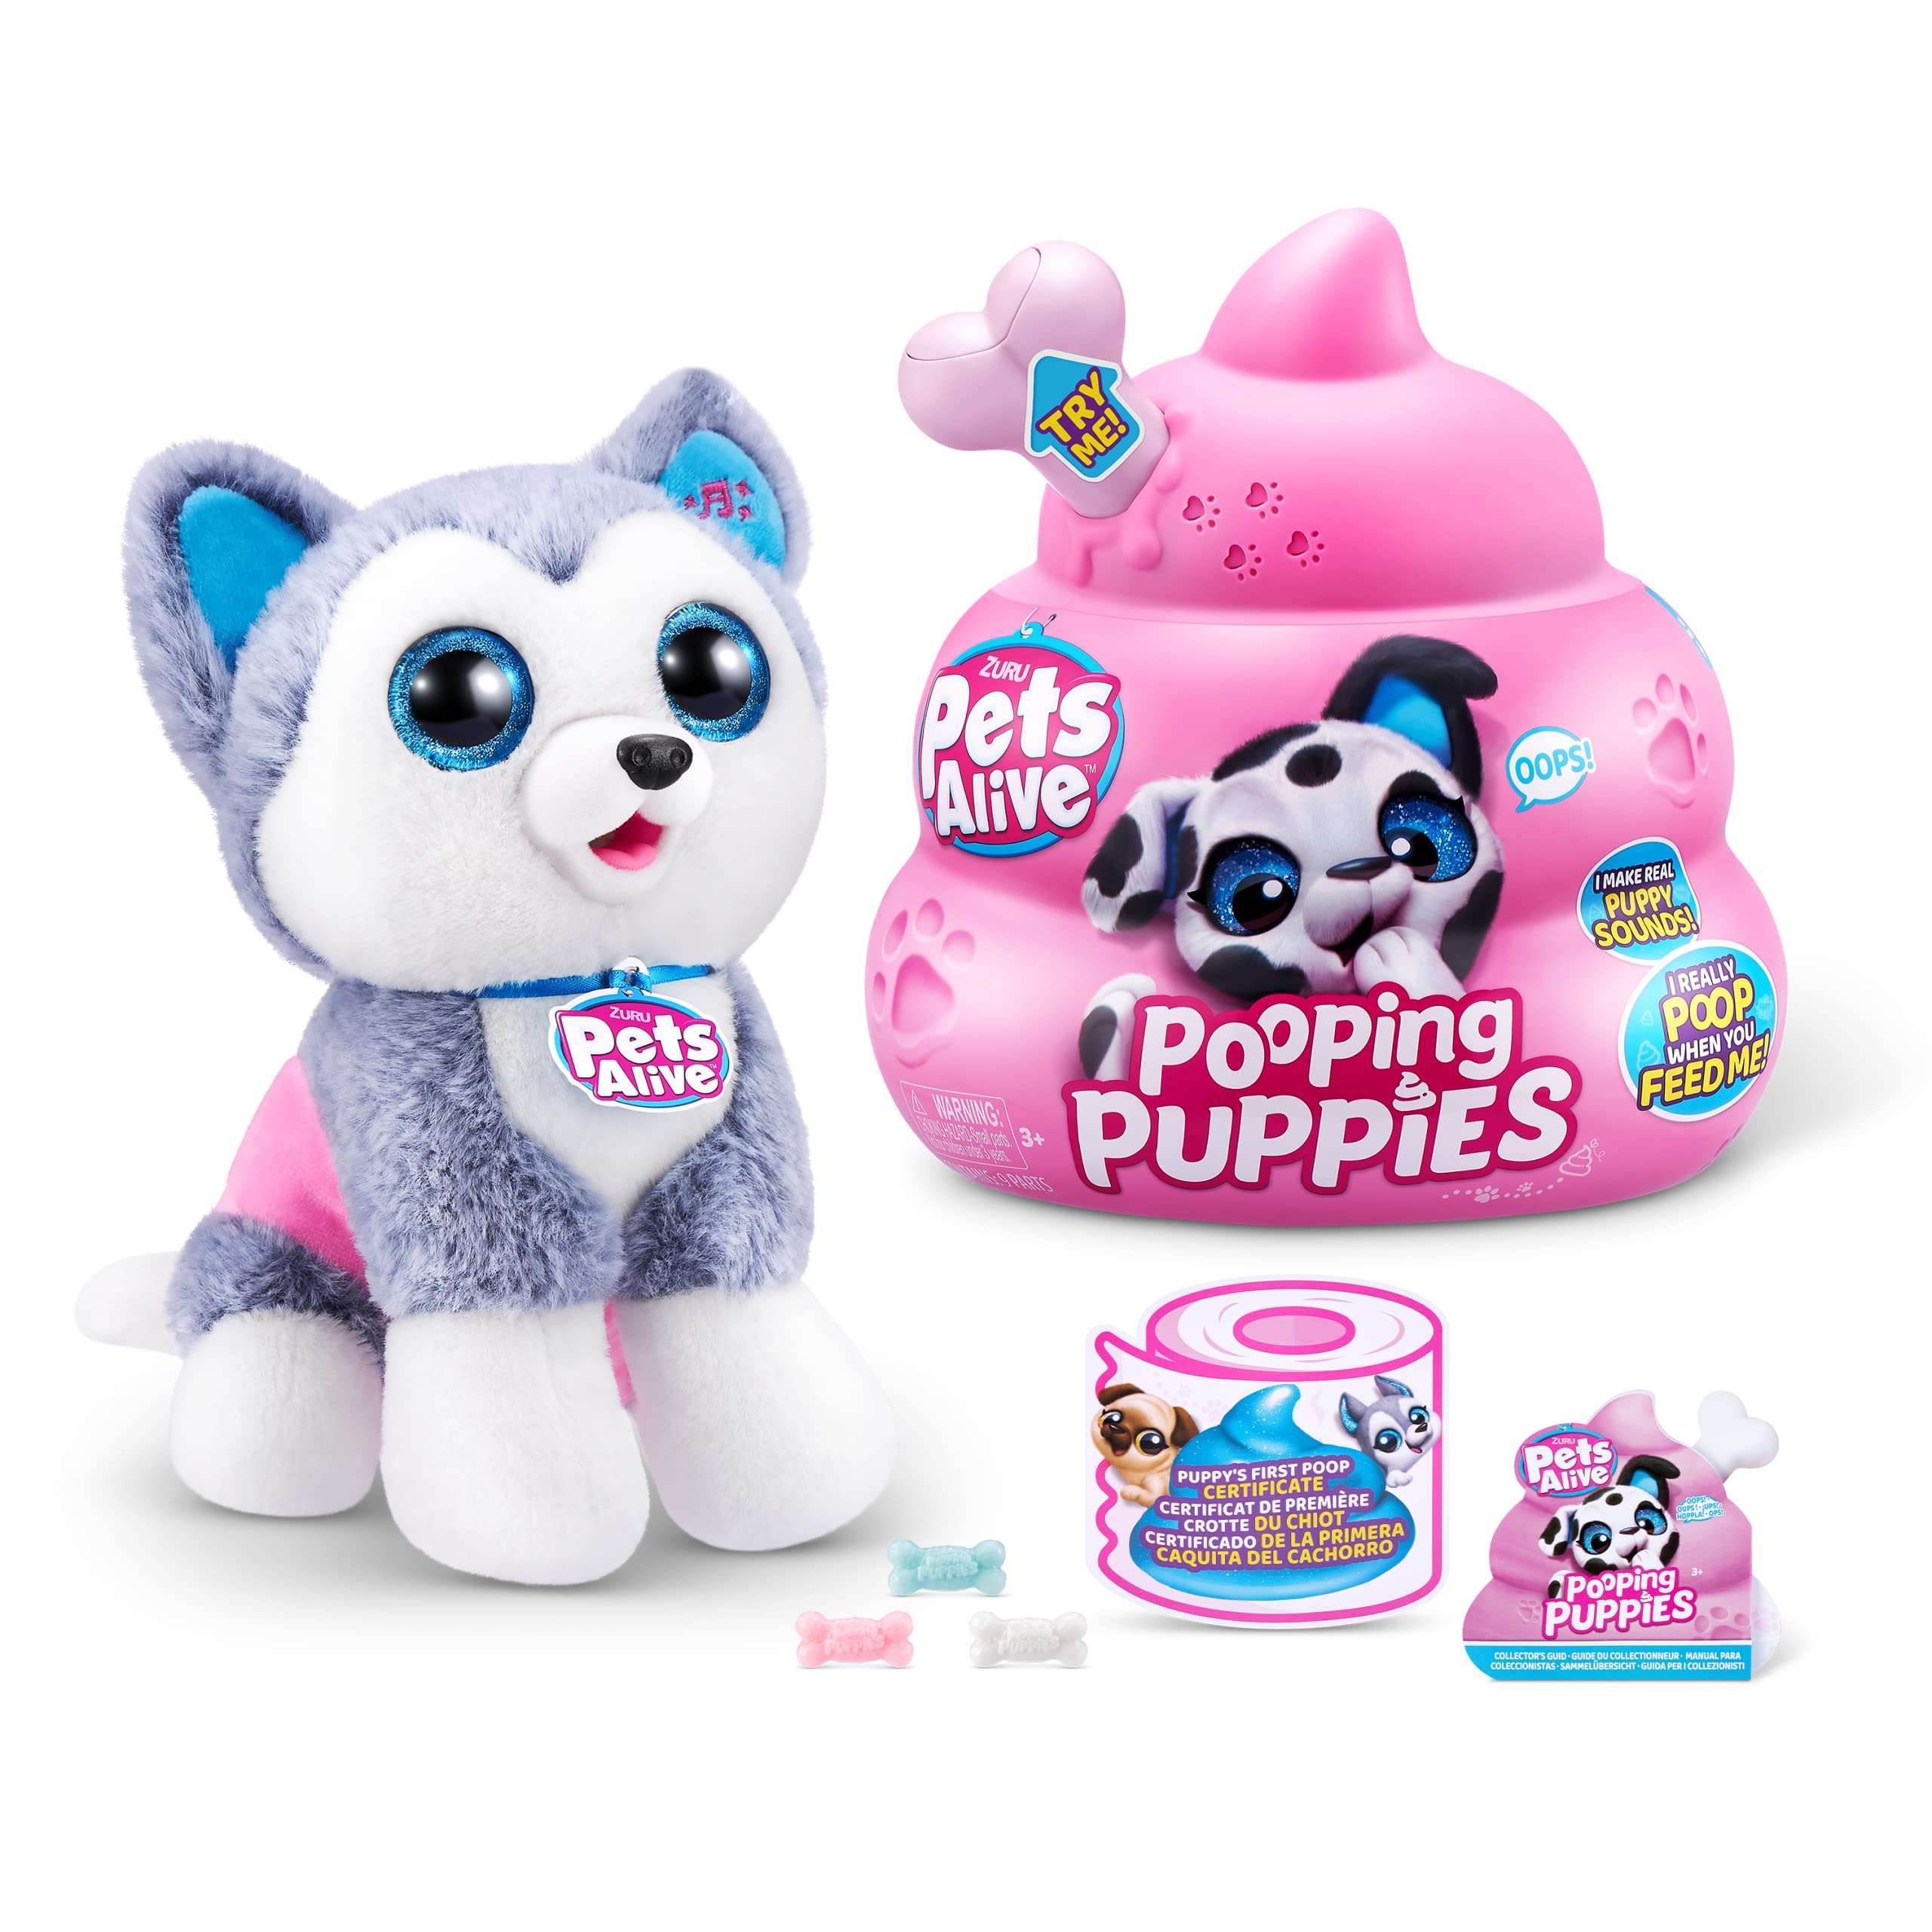 Pets Alive Pooping Puppies (Husky) by ZURU Real Pet Dog Puppy Play Soft Toy Developmental Color Change Nuturing Unboxing